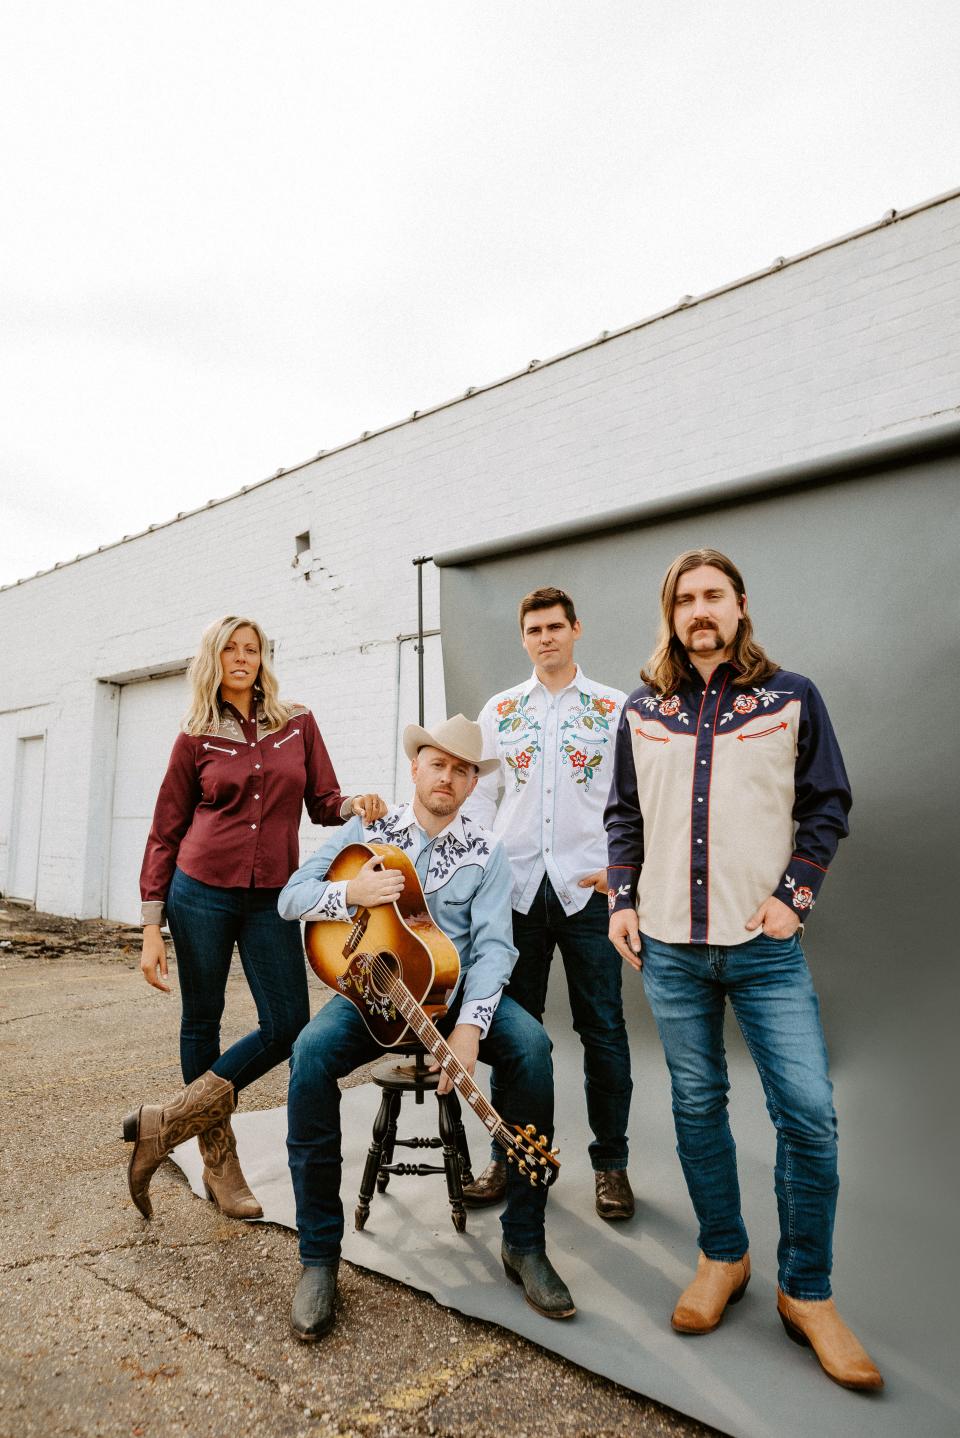 The Shootouts will perform on Feb. 24 at the Grand Ole Opry in Nashville, the same day as the release of the retro country and honky-tonk band's new album, "Stampede."